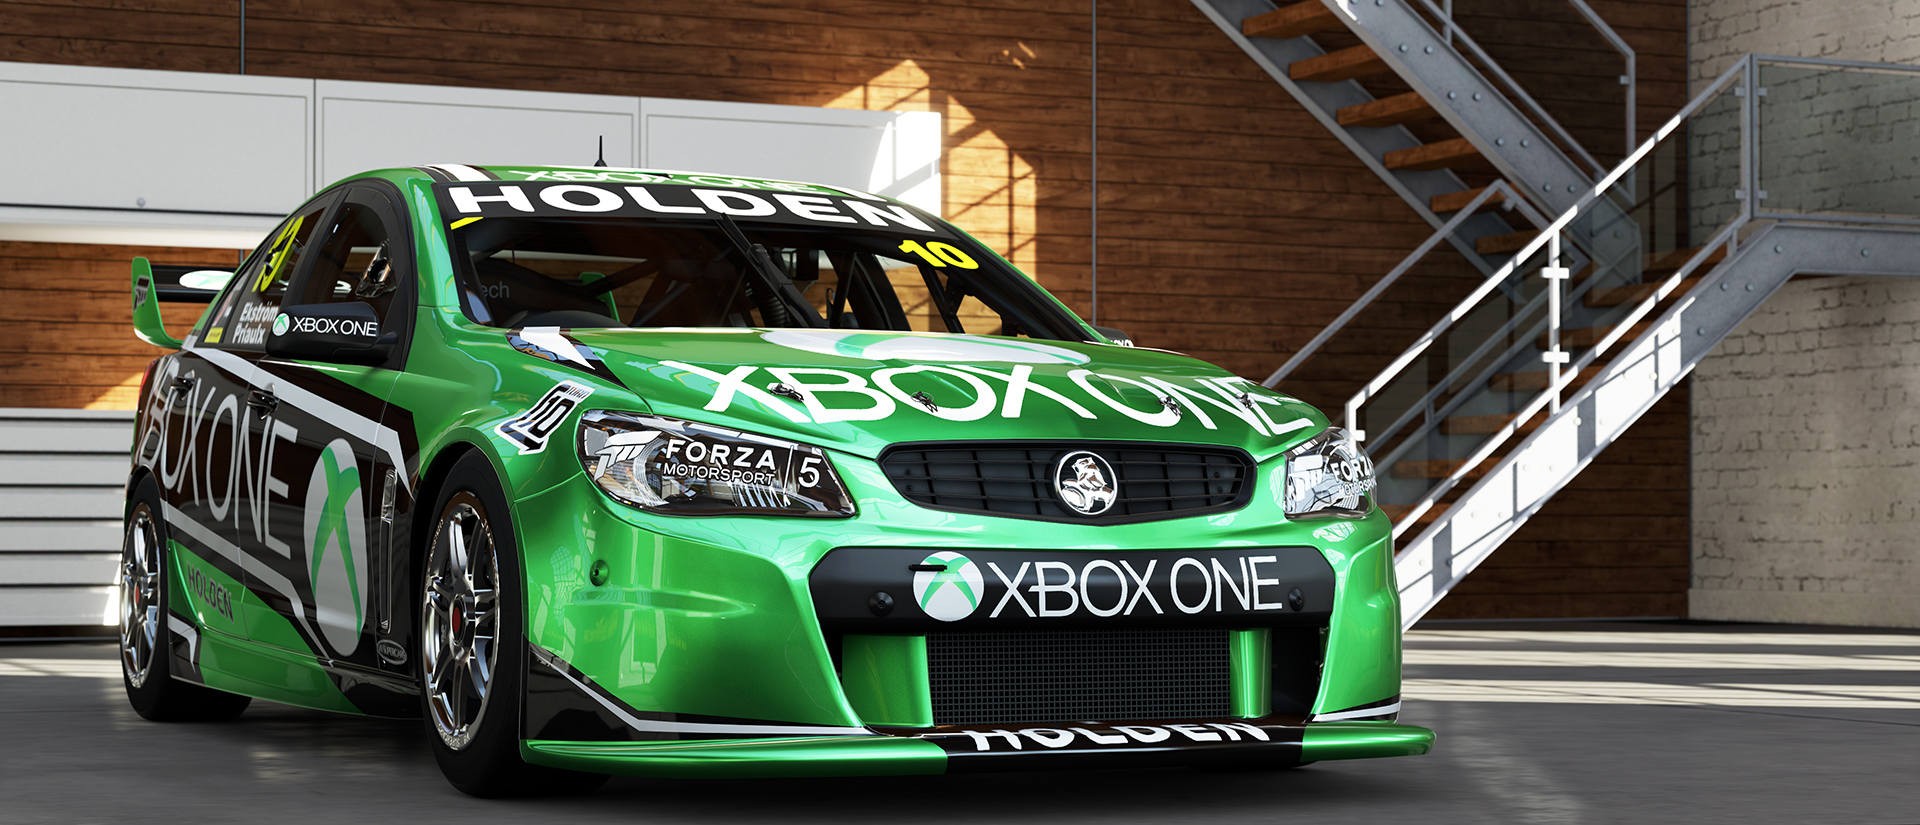 forza 5 game of the year edition